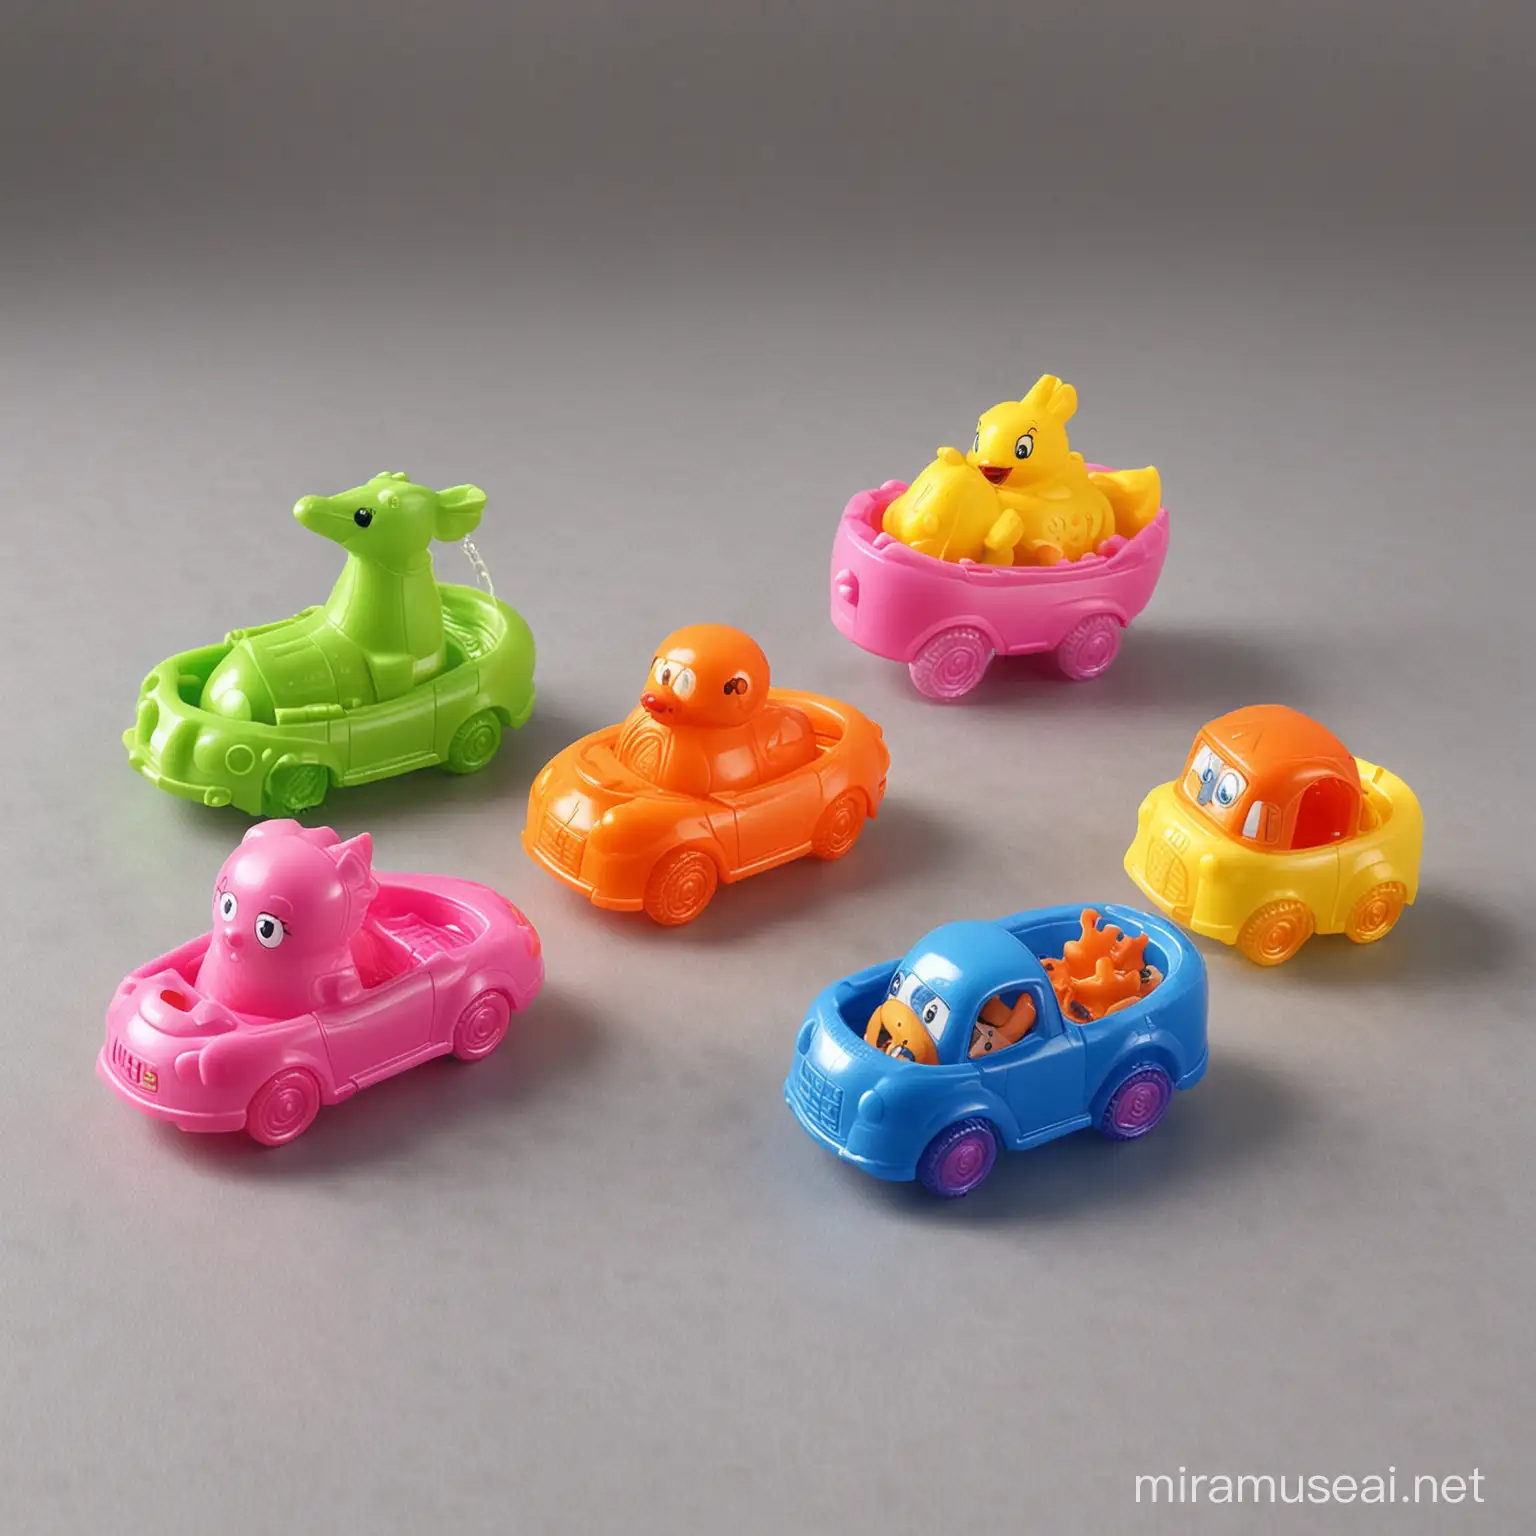 Colorful Bath Time Fun with Plastic Toys